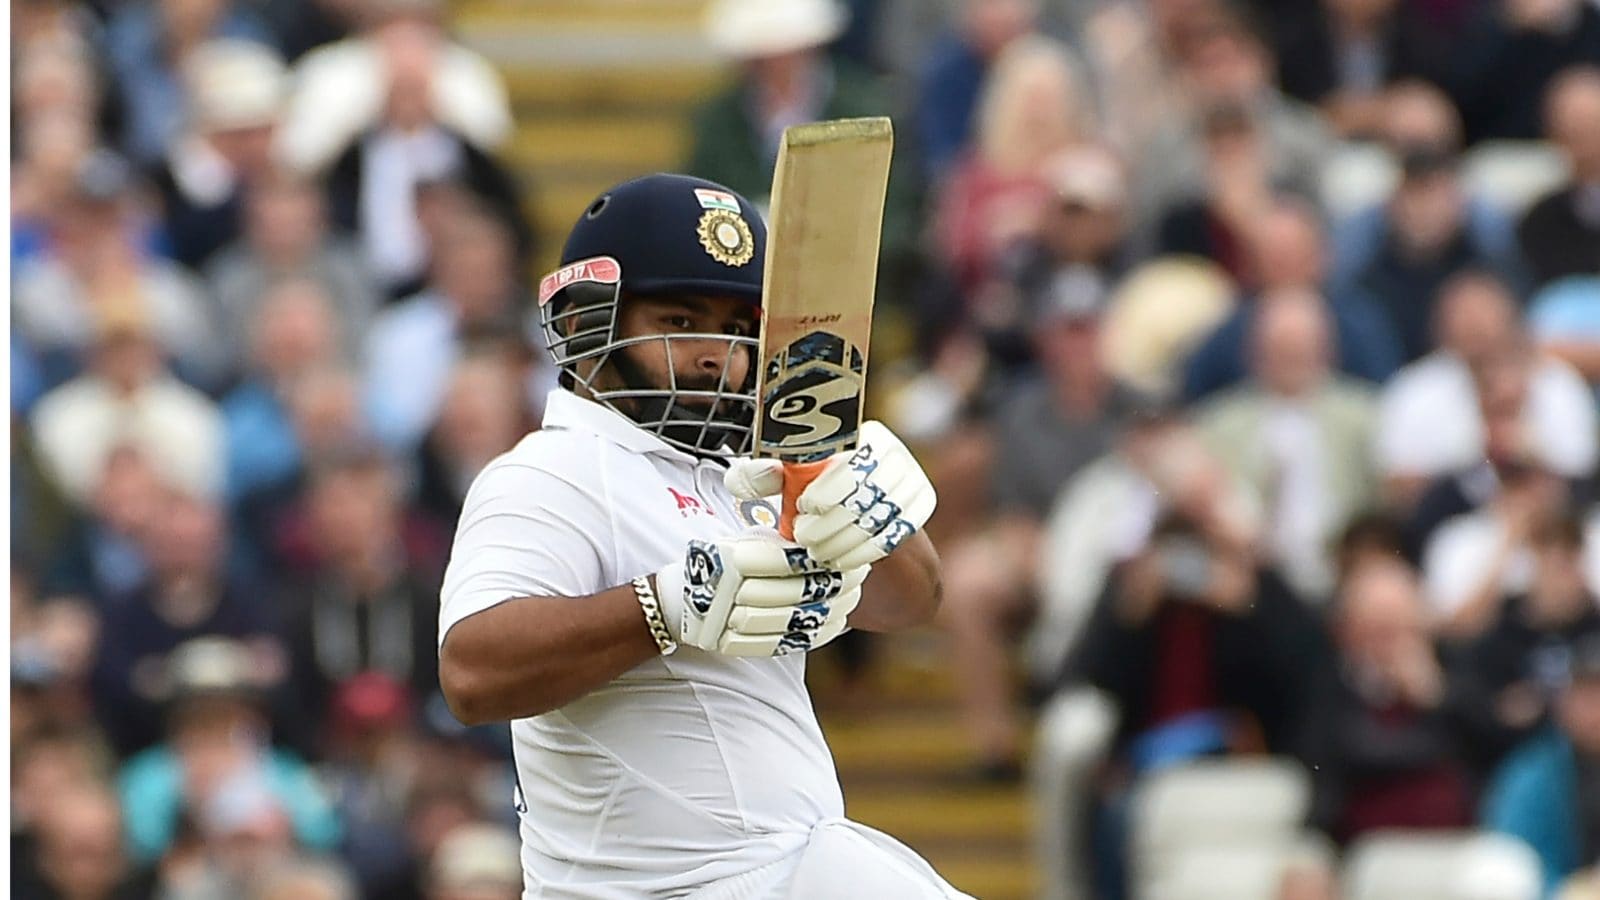 Watch: Rishabh Pant hits a brilliant boundary on the first day of the 5th Test on the pitch